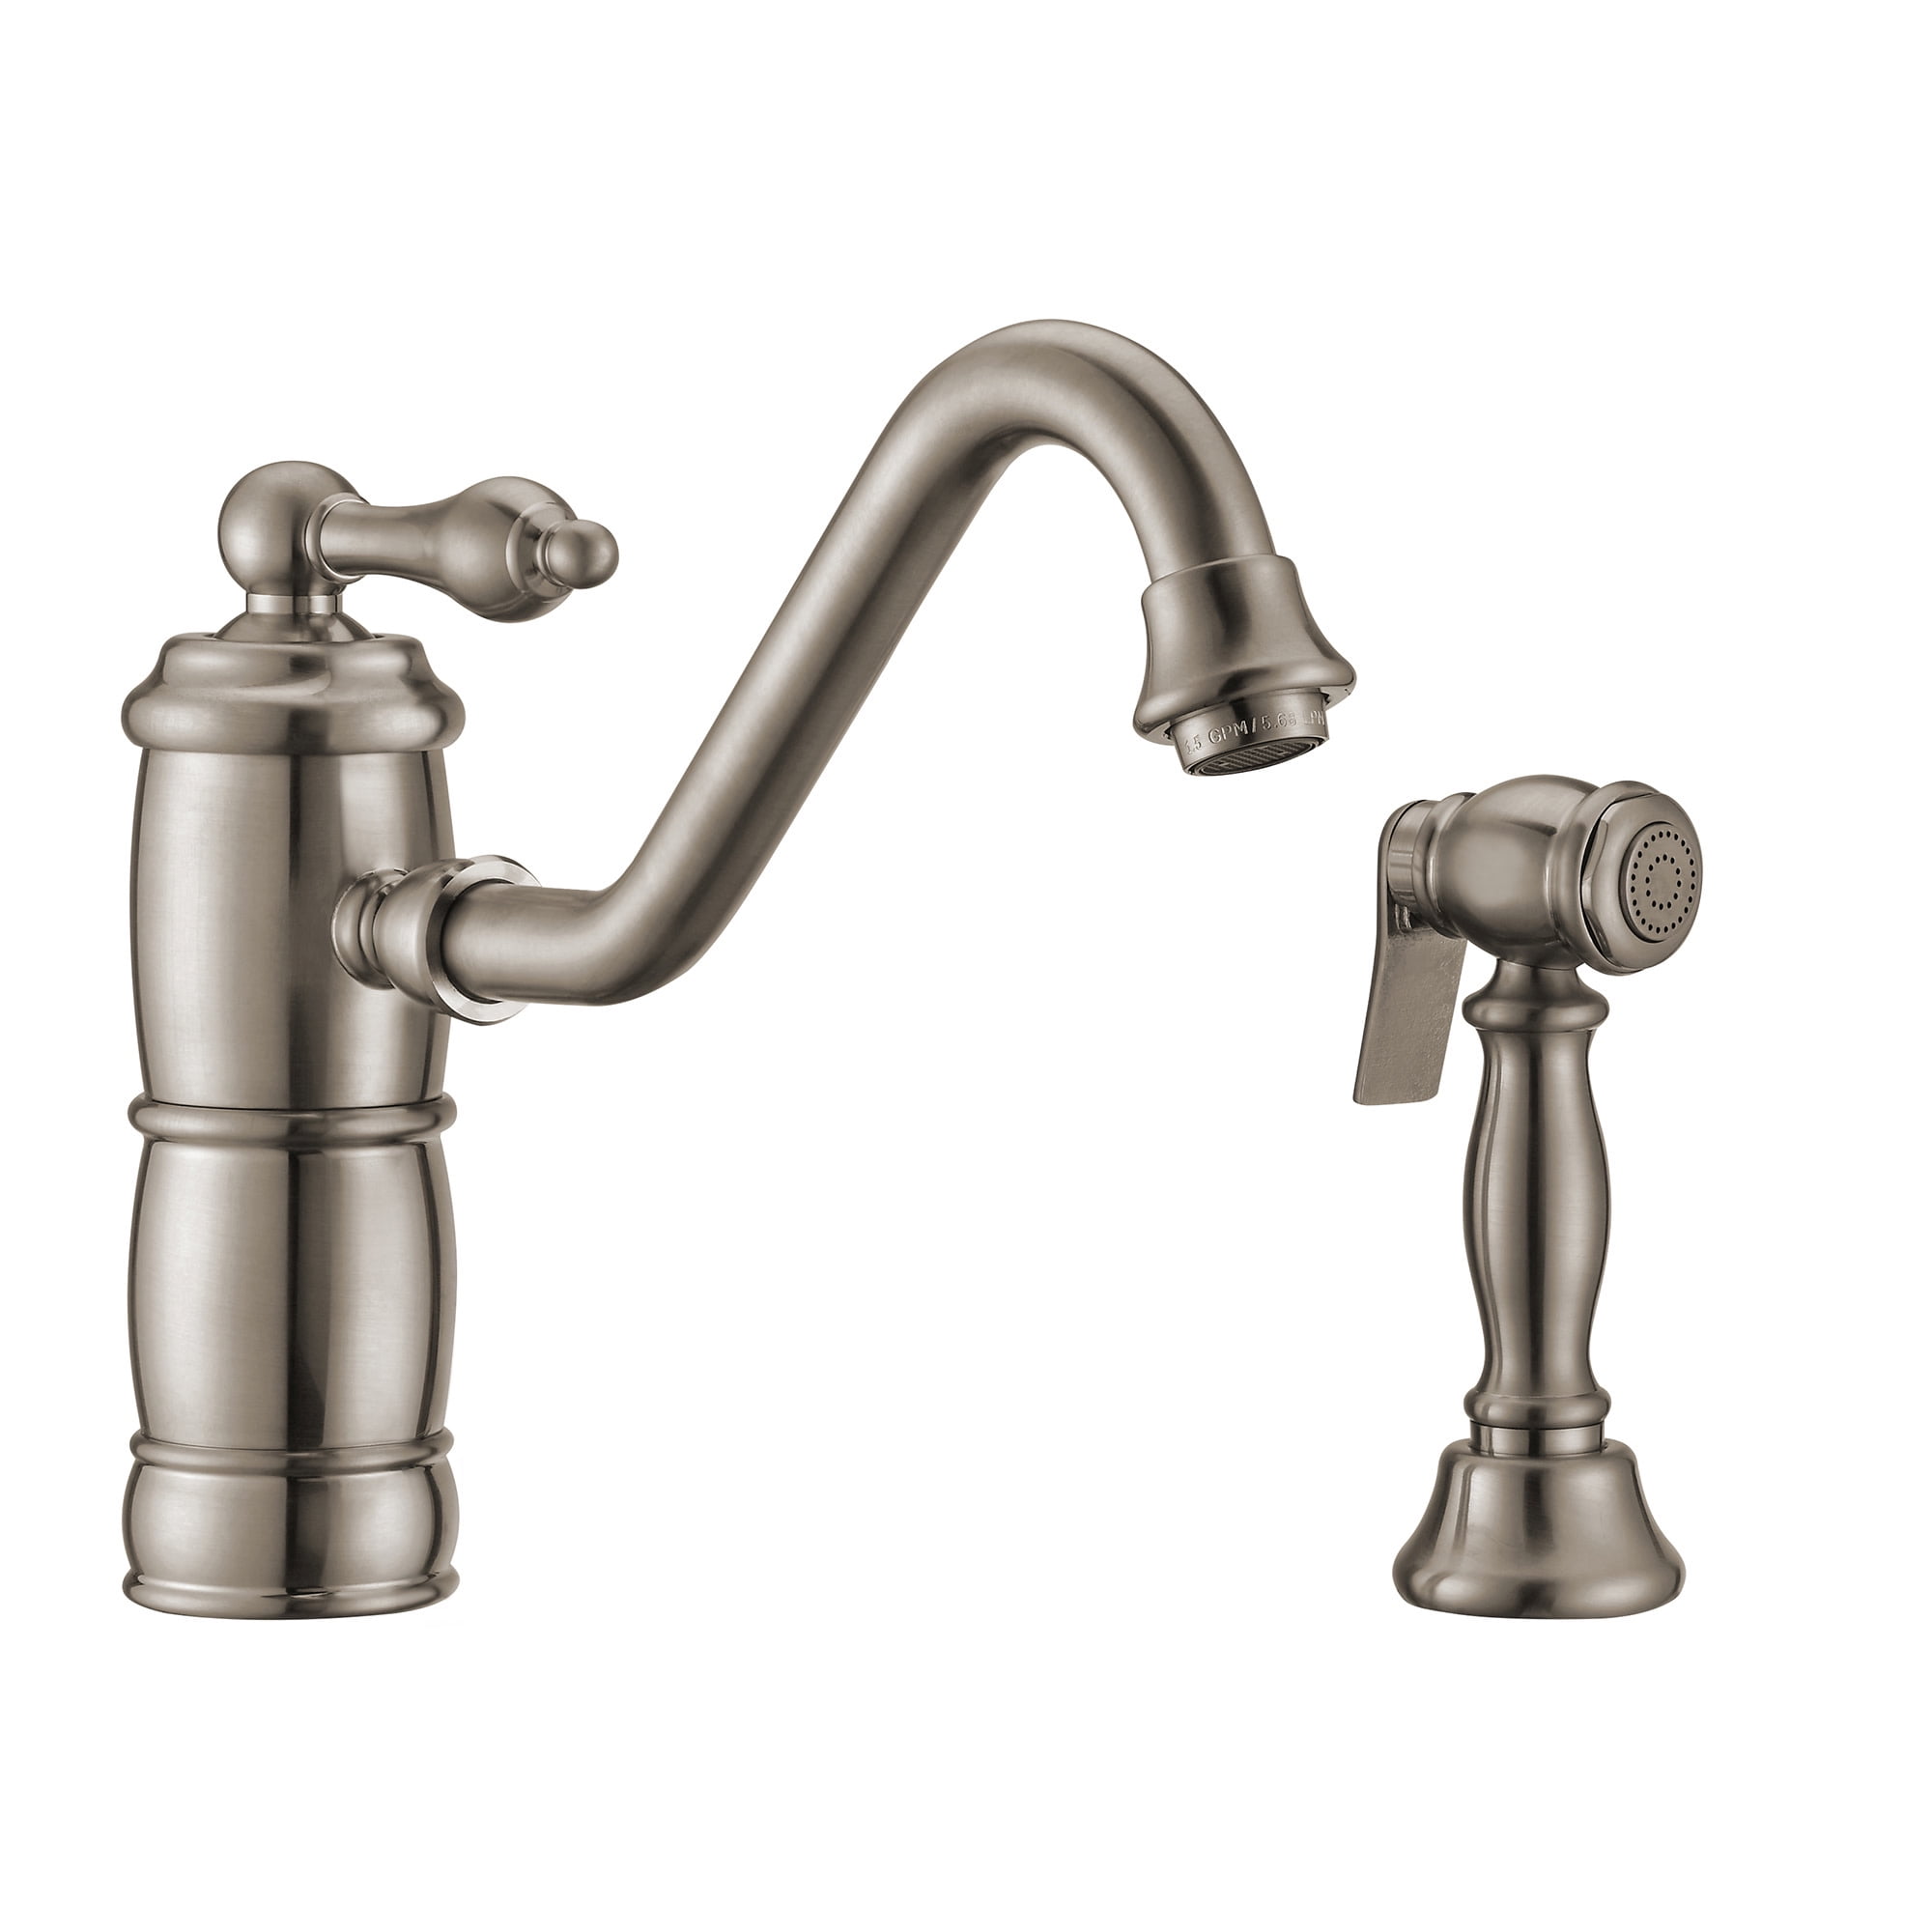 Whktsl3-2200-nt-bn Vintage Iii Plus Single-lever Faucet With A Traditional Swivel Spout - Brushed Nickel